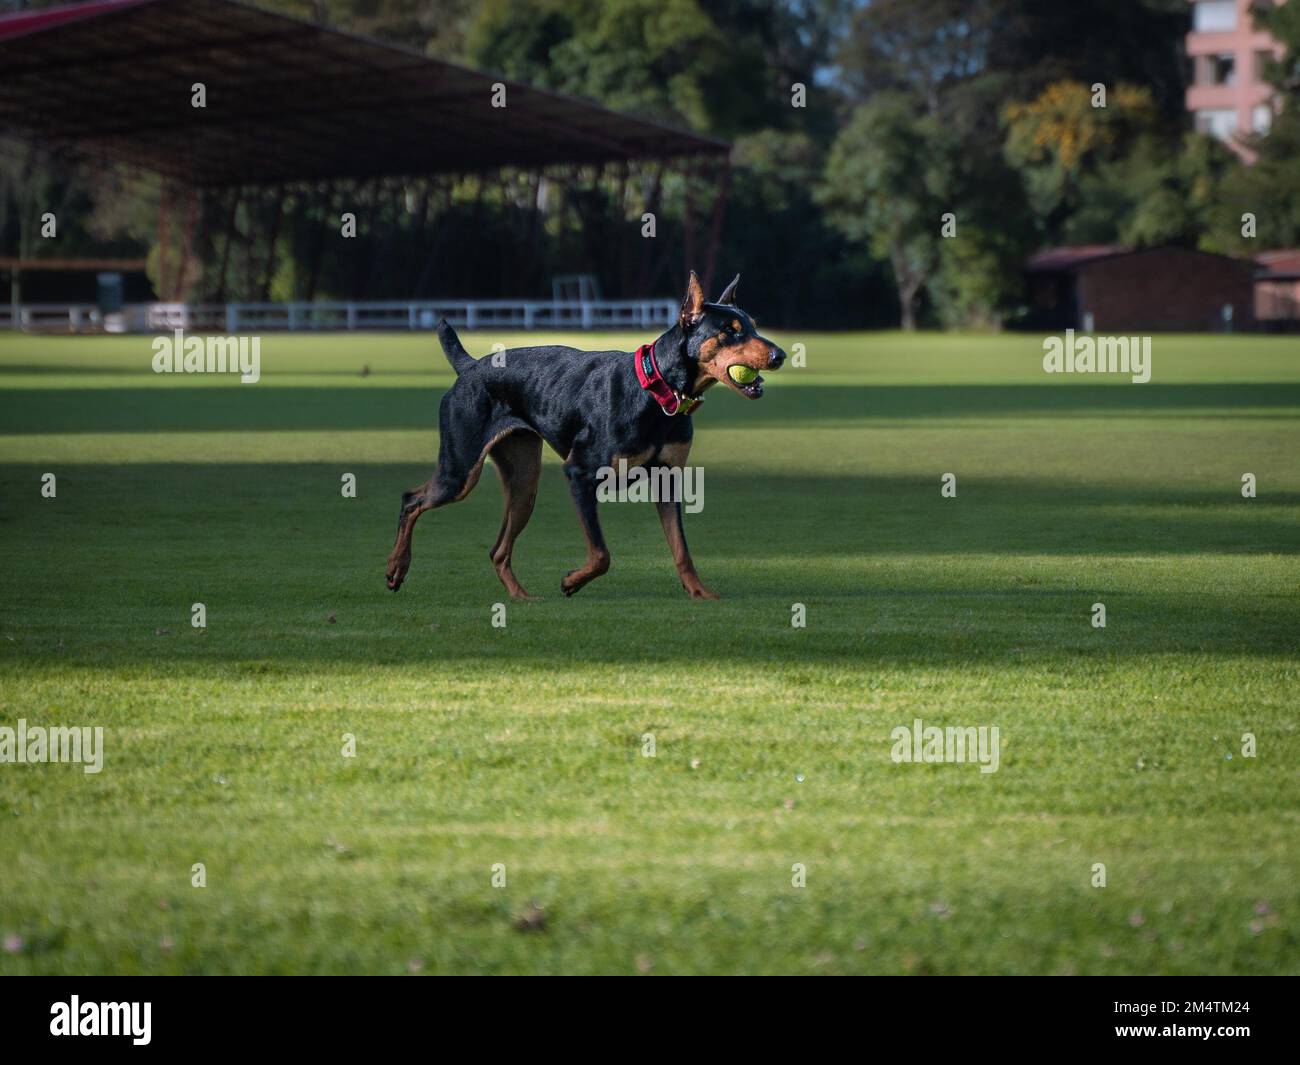 Dobermann dog playing in the park Stock Photo